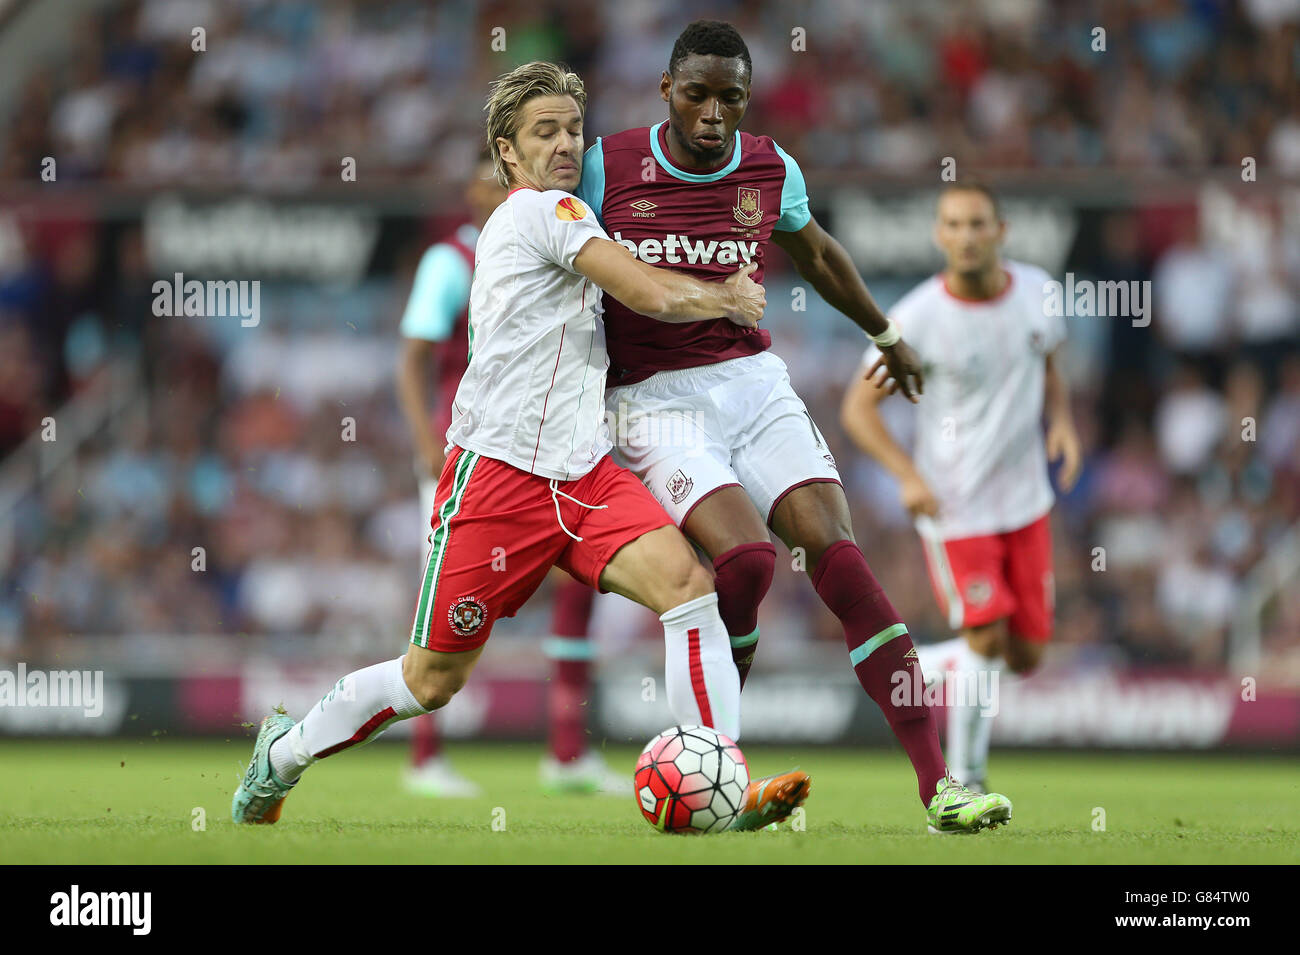 FC Lusitan's Edu Moya (left) and West Ham United's Diafra Sakho in action during the UEFA Europa League first round qualifying match at Upton Park, London. Stock Photo